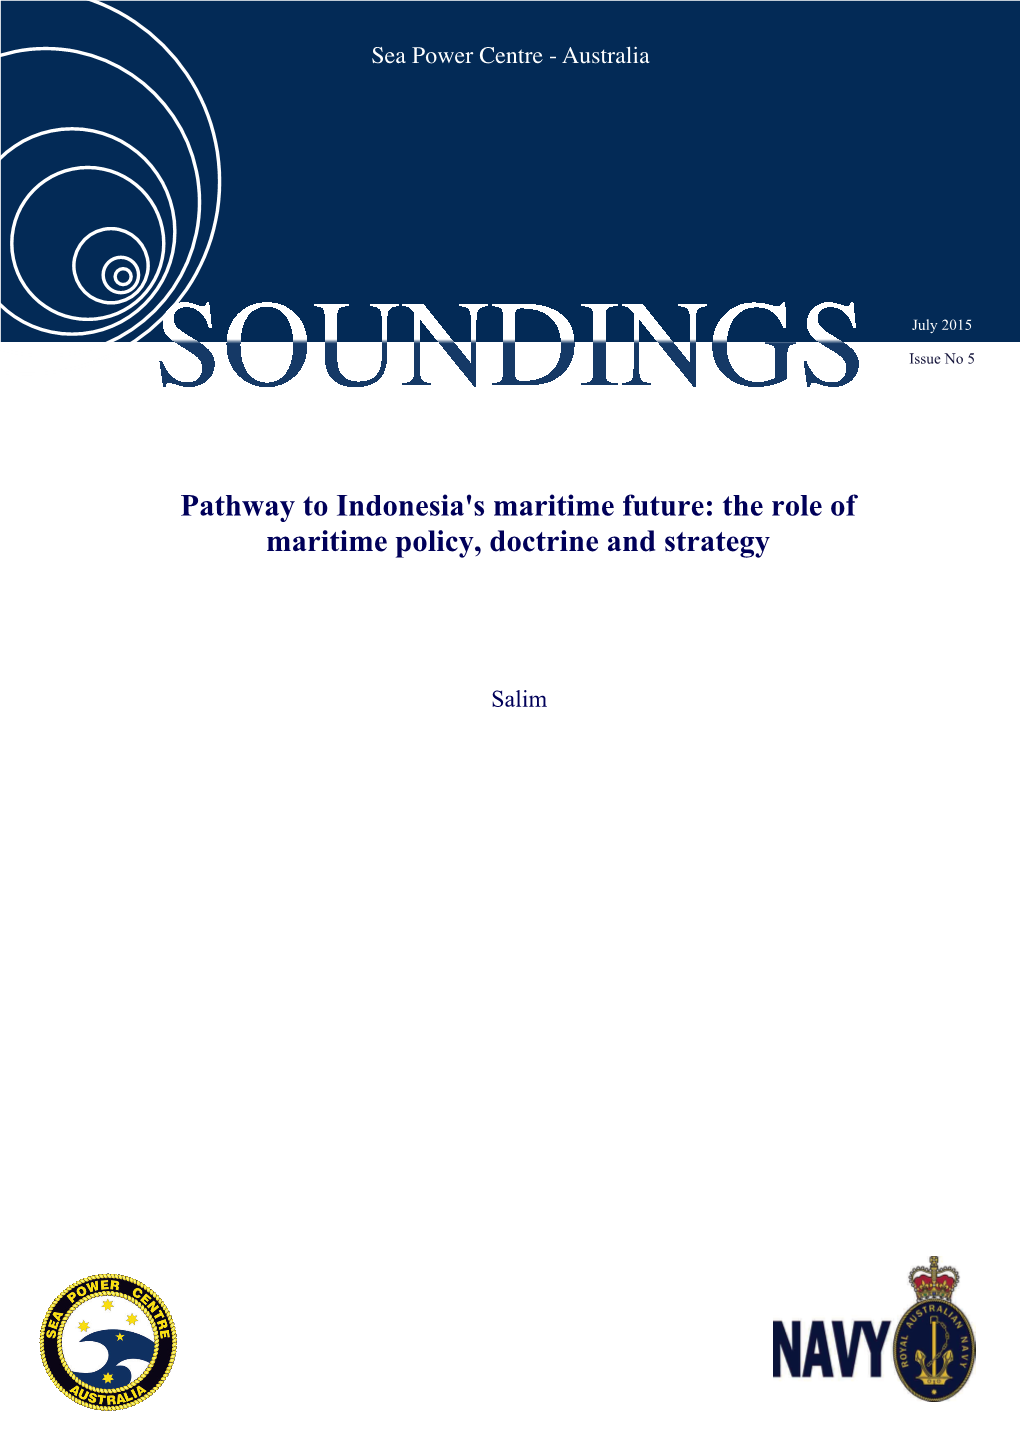 Soundings Issue 4 July 2015